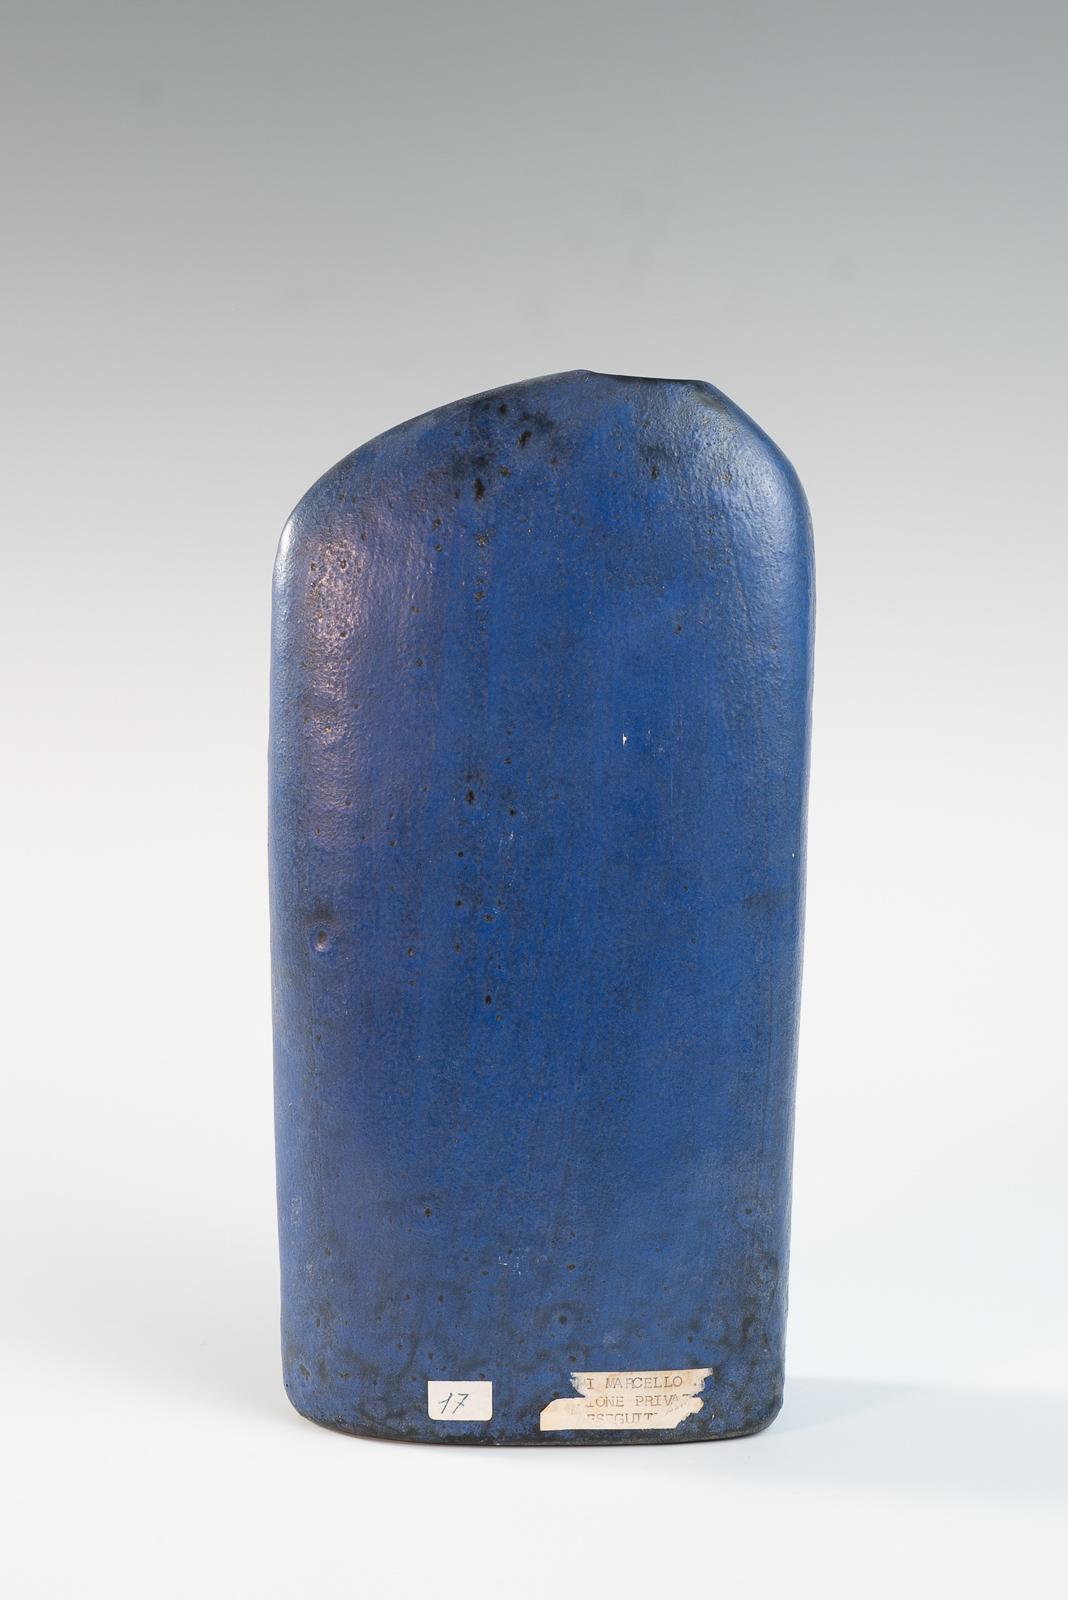 Lapis blue asymmetric slab vase by Marcello Fantoni

Signed to the base by Fantoni himself, dated 1957

remains of a collection label to the rear

Italy, circa 1957.

Provenance: Sourced directly from the Fantoni family.

This piece was